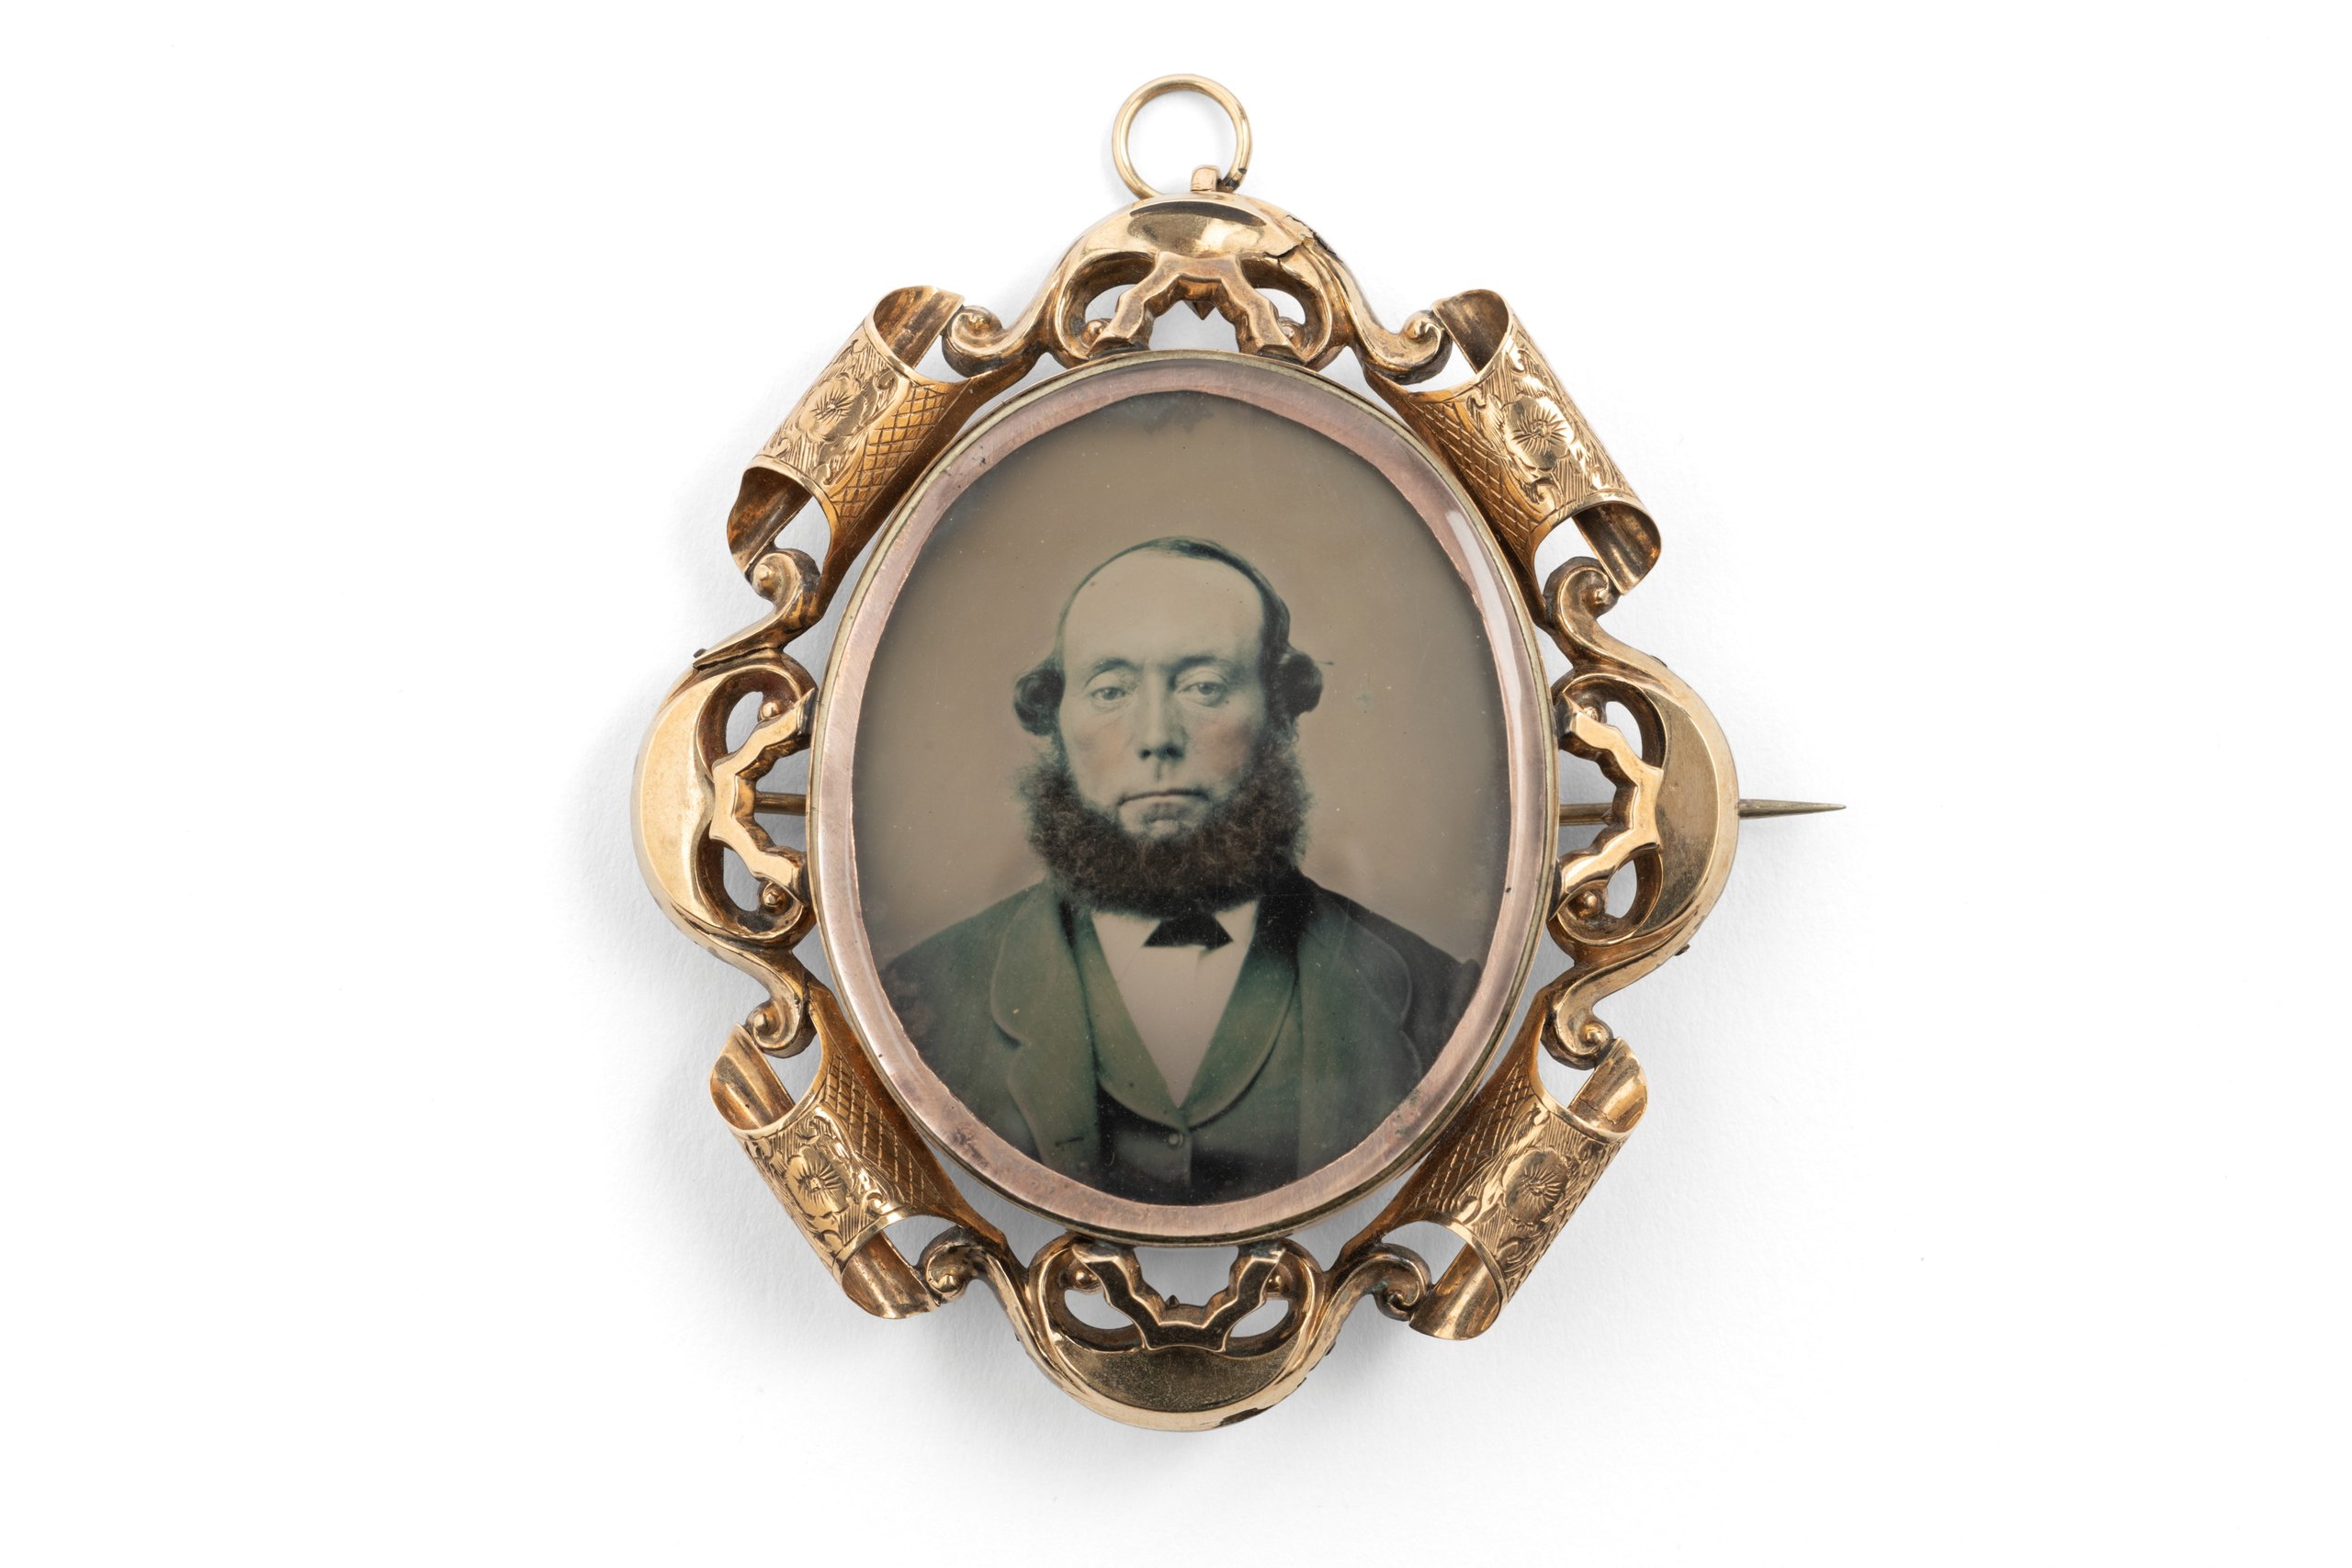 Mourning brooch with portrait of Captain R J Miller